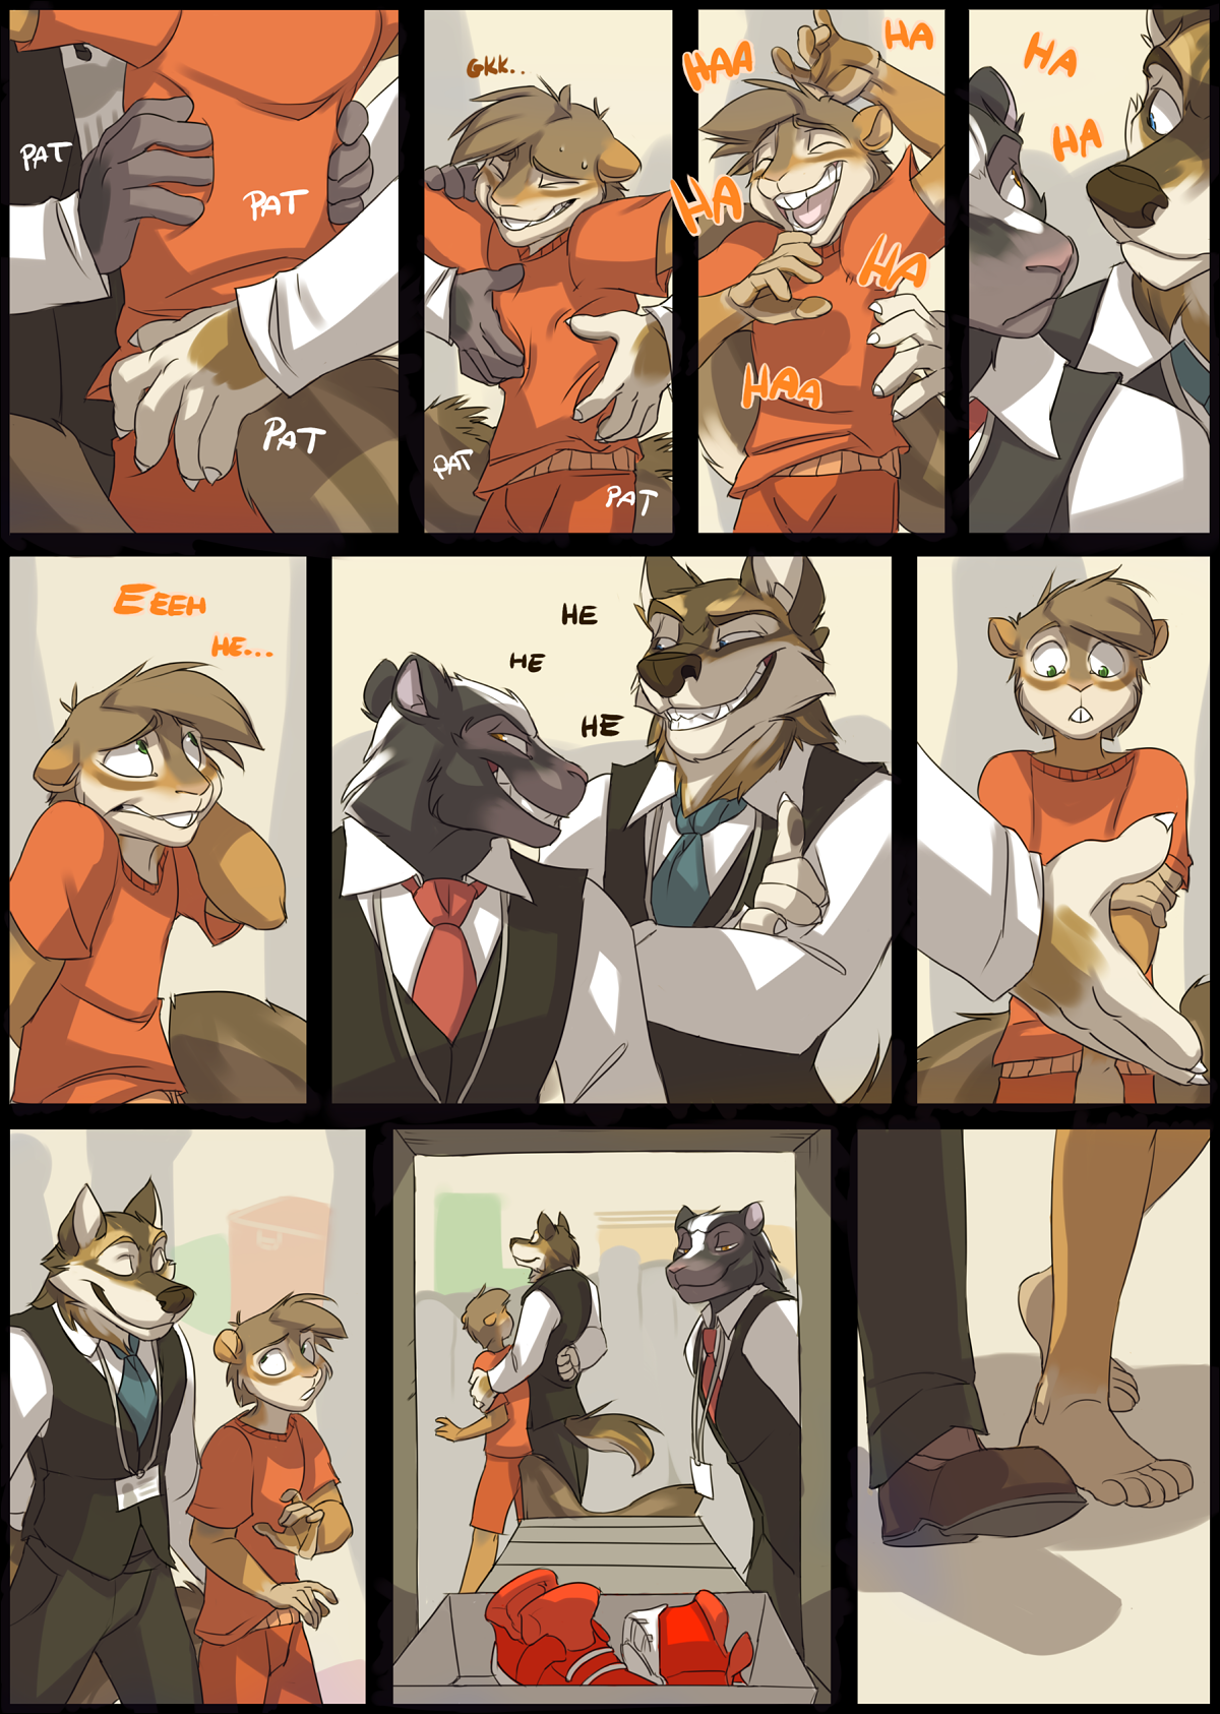 An Intensive Security Examination - PG 3 - COMISSION by Vikt